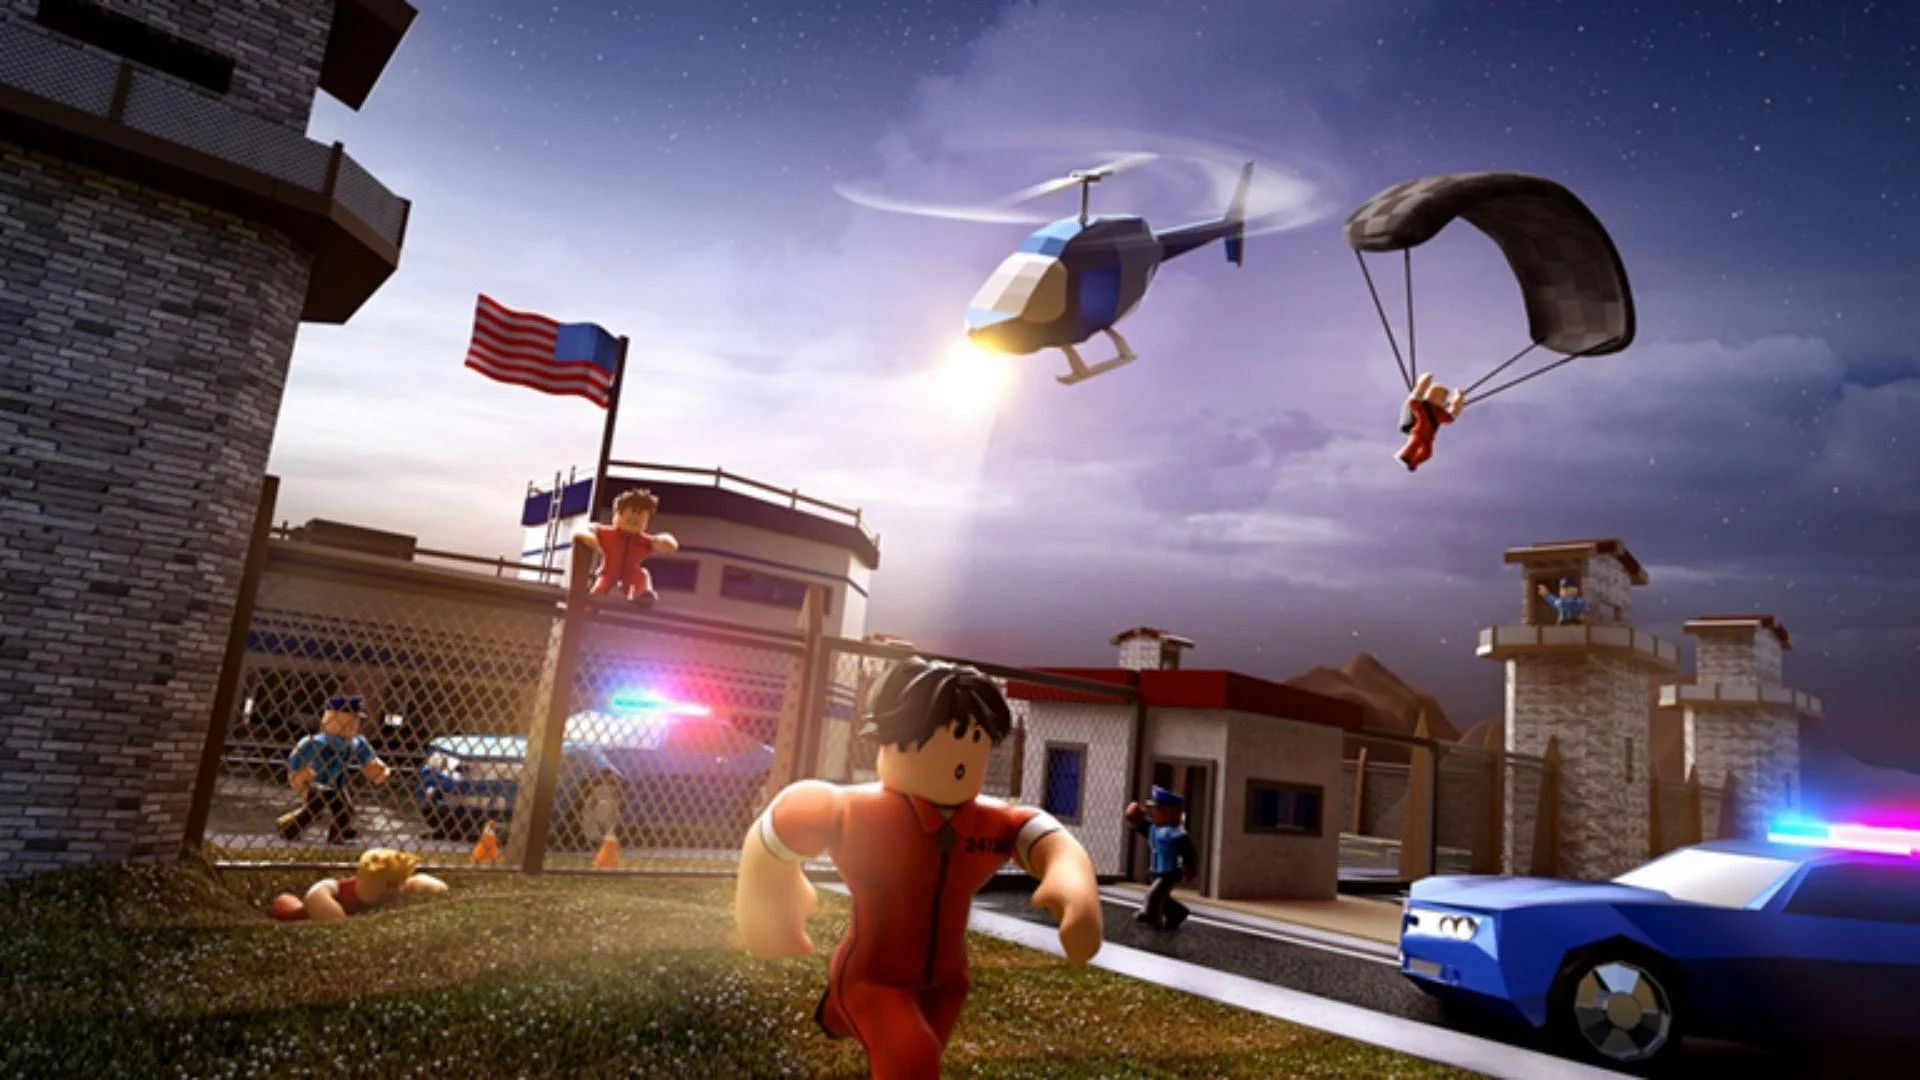 Get freedom and more power with free codes (Image via Roblox)